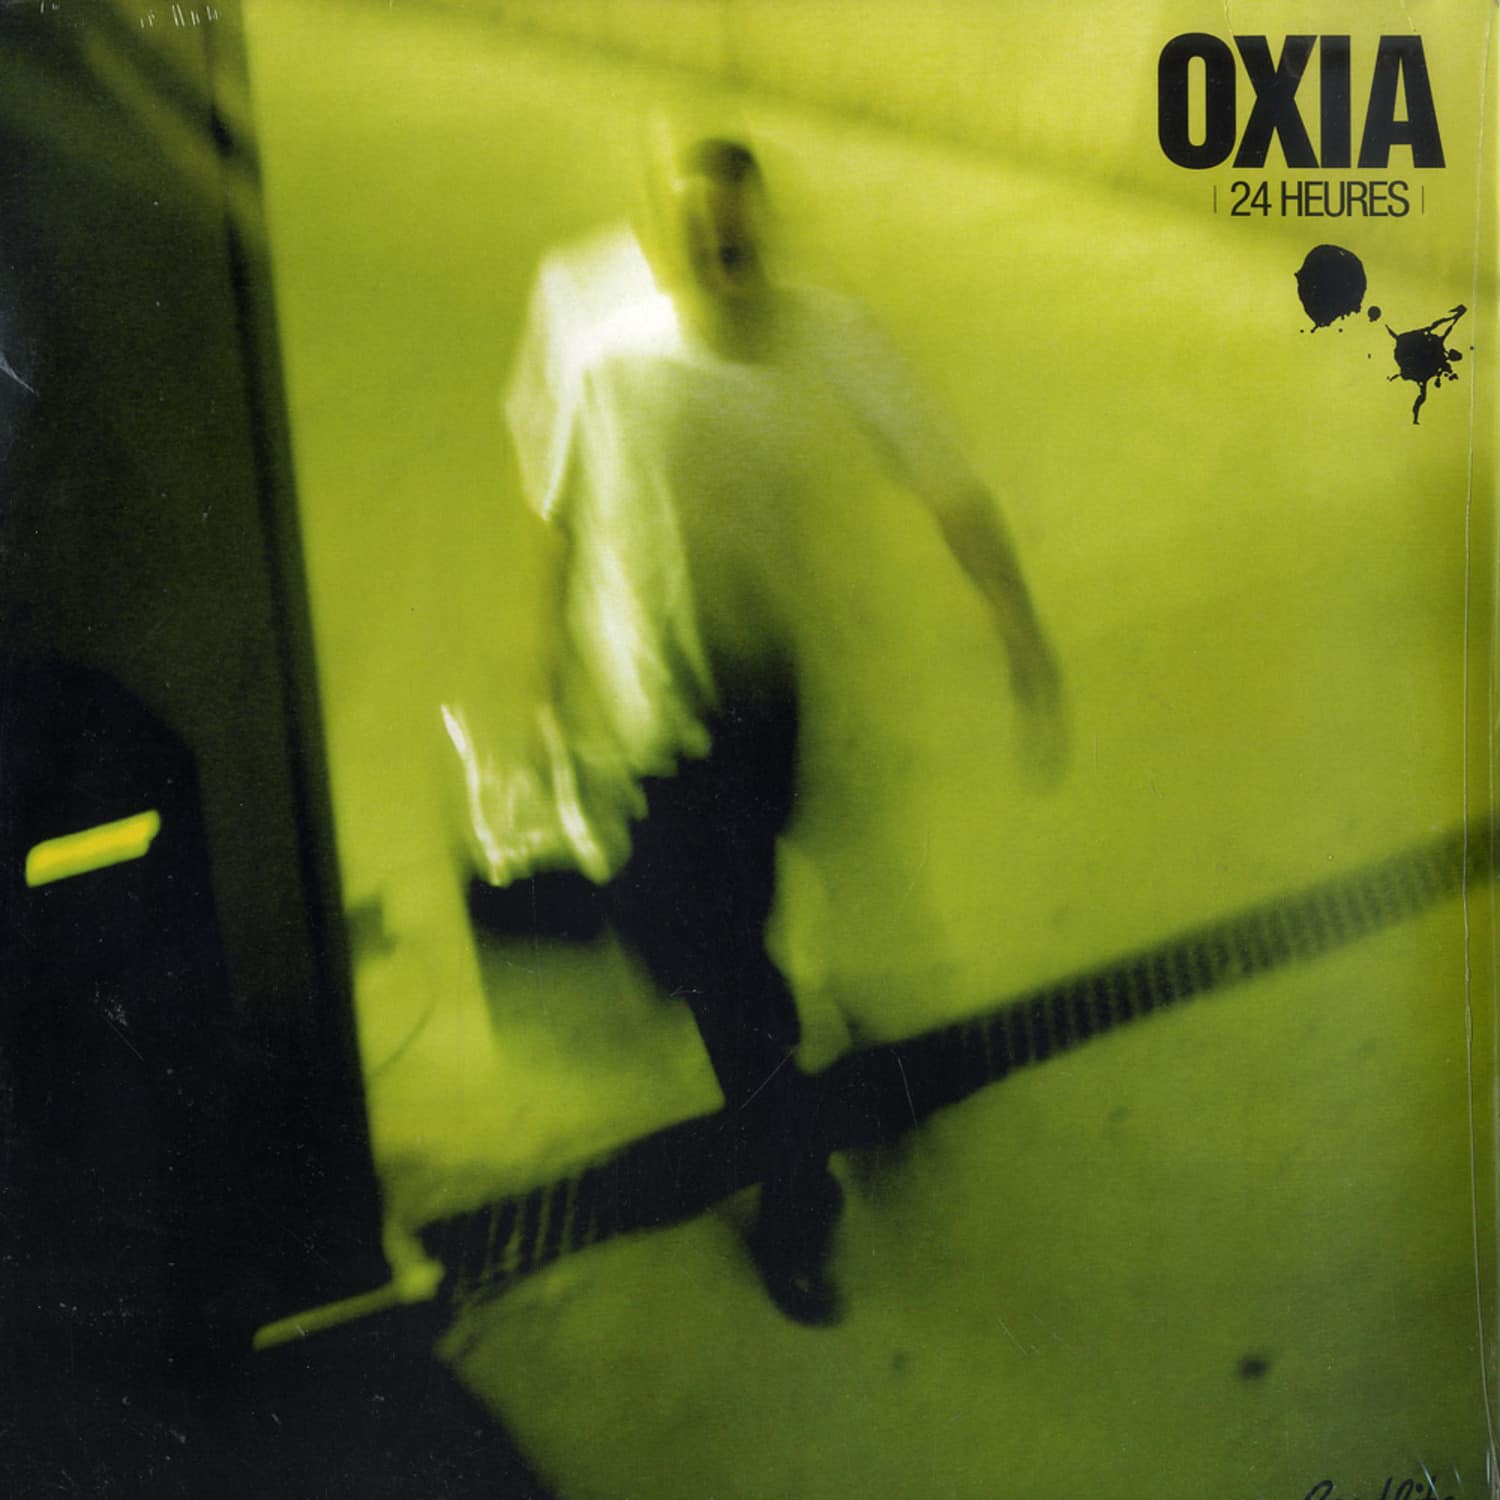 Oxia - 24 HEURES 